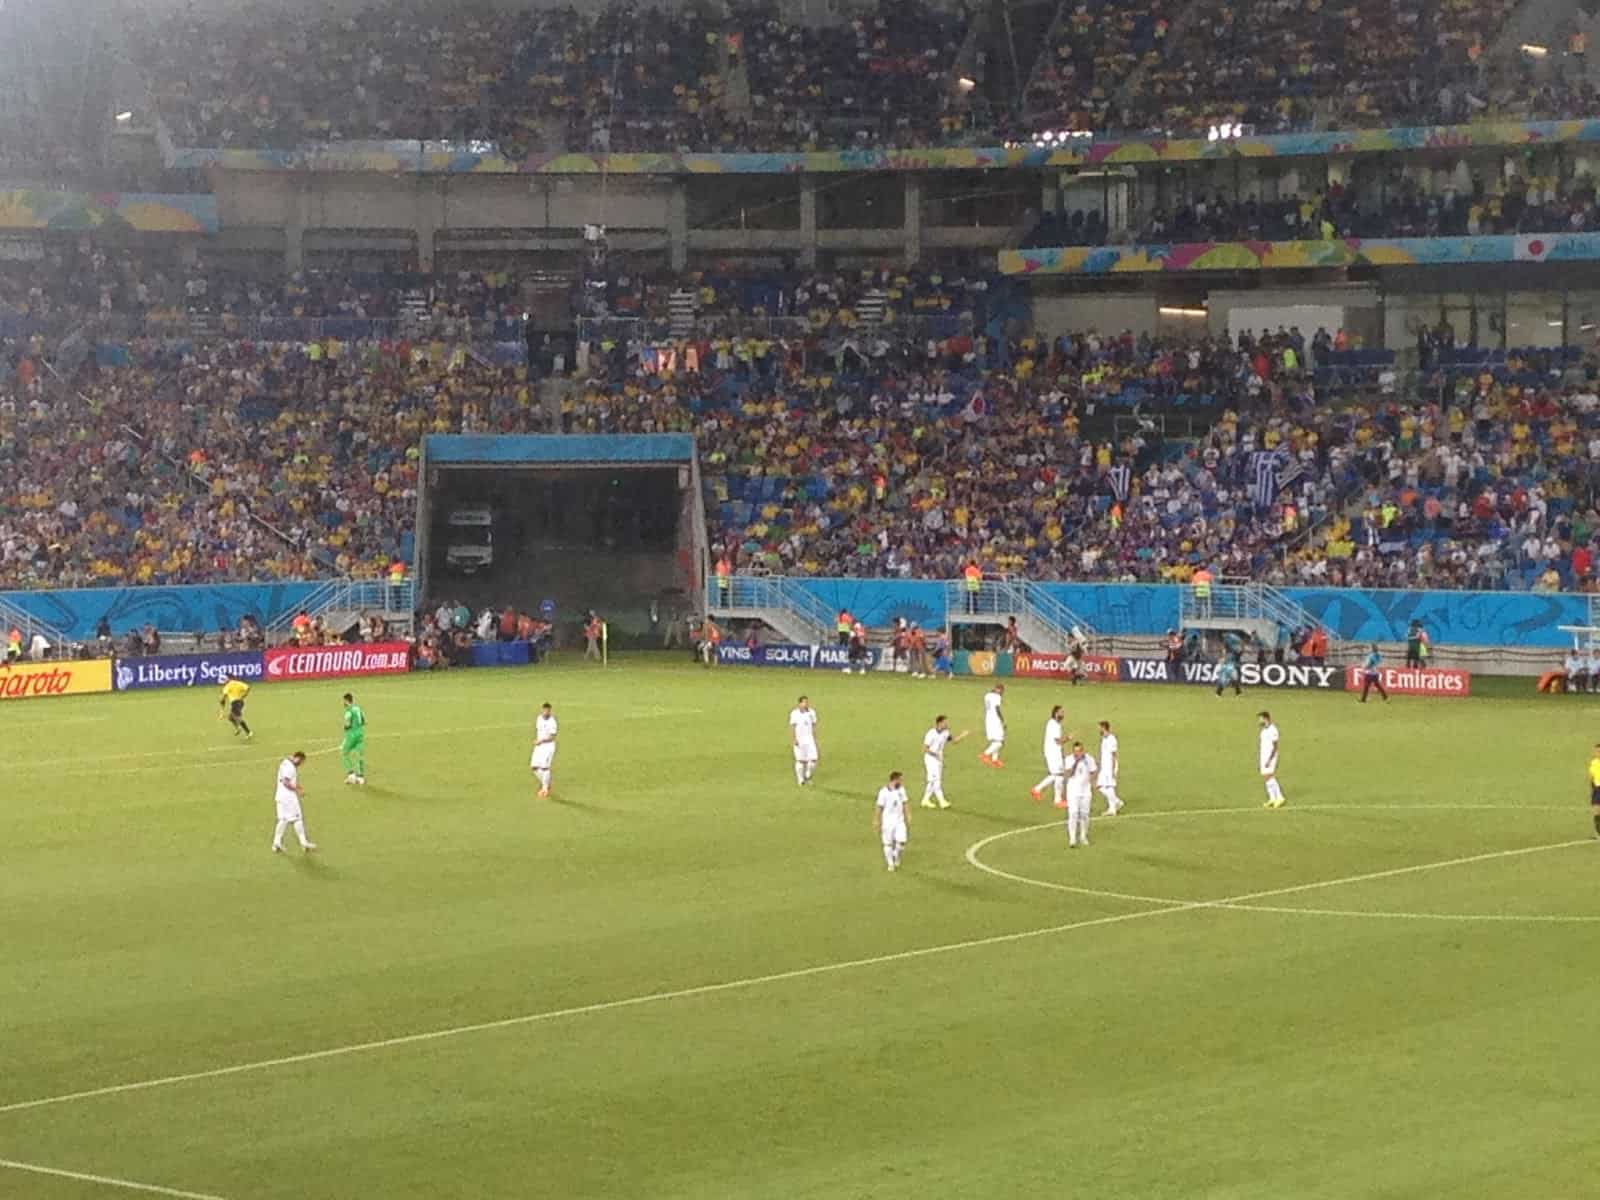 Greece vs Japan World Cup 2014 at Arena das Dunas in Natal, Brazil